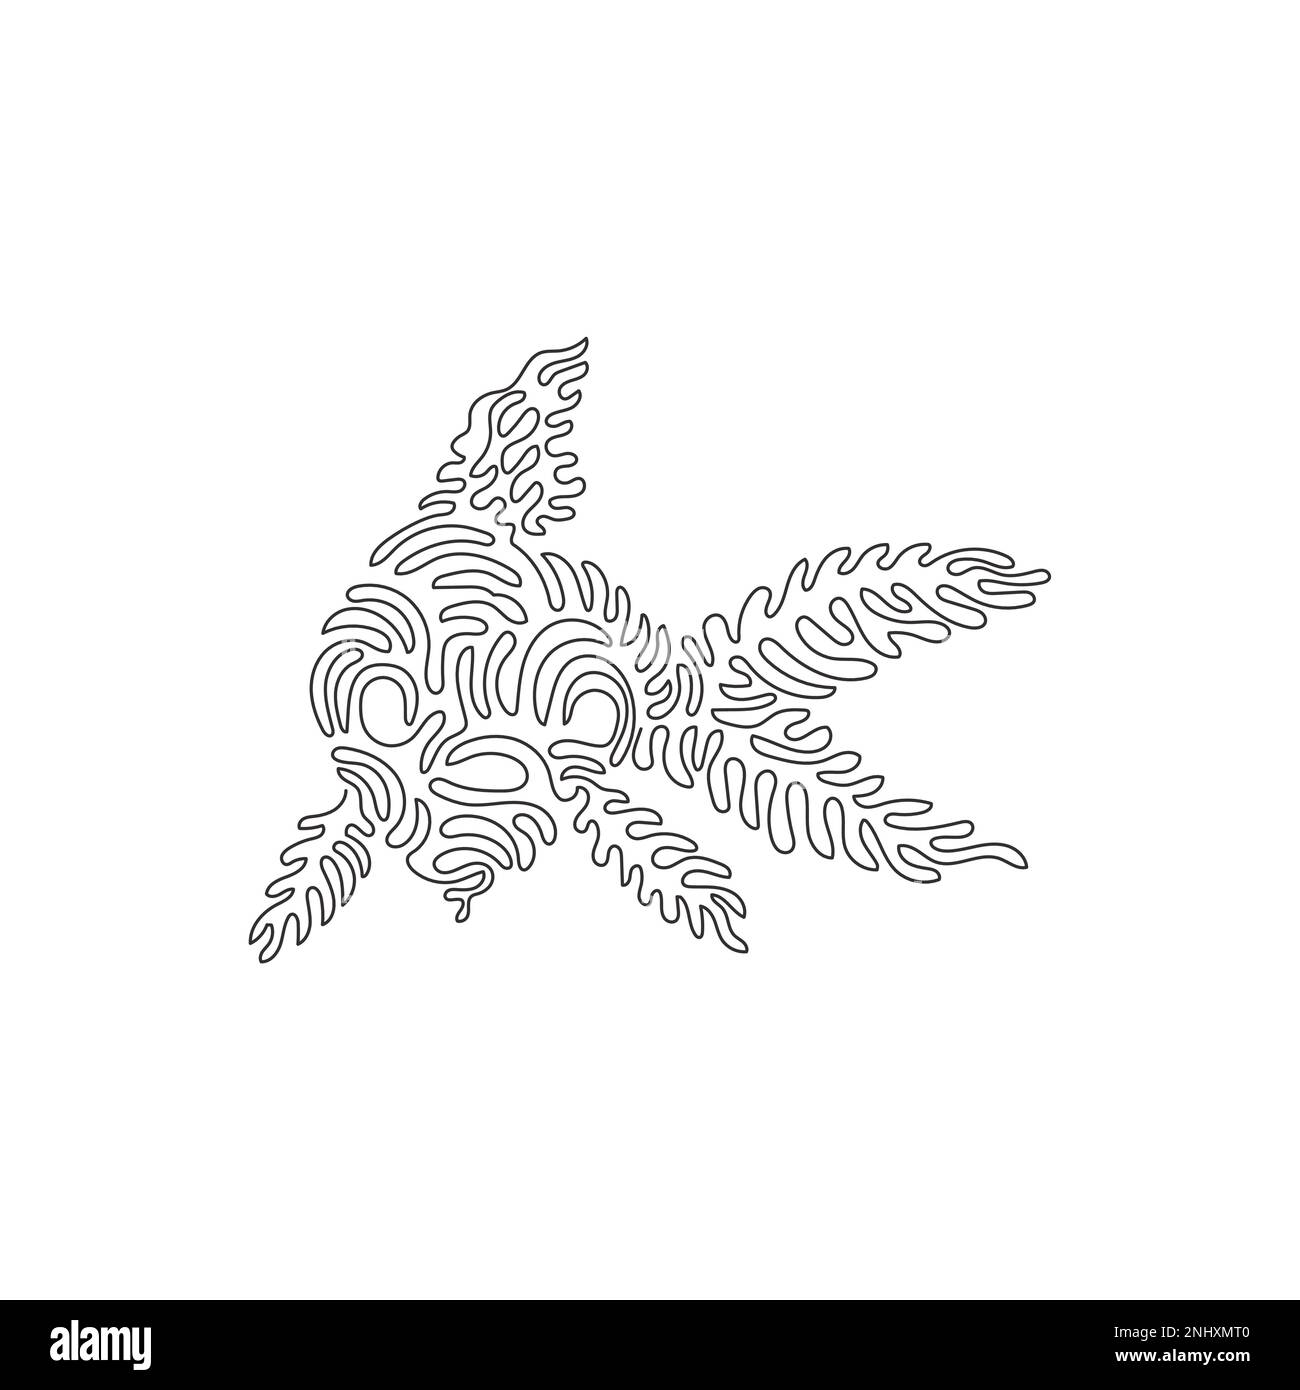 Continuous curve one line drawing of hardy aquatic species curve abstract art. Single line editable vector illustration of friendly domestic animal Stock Vector